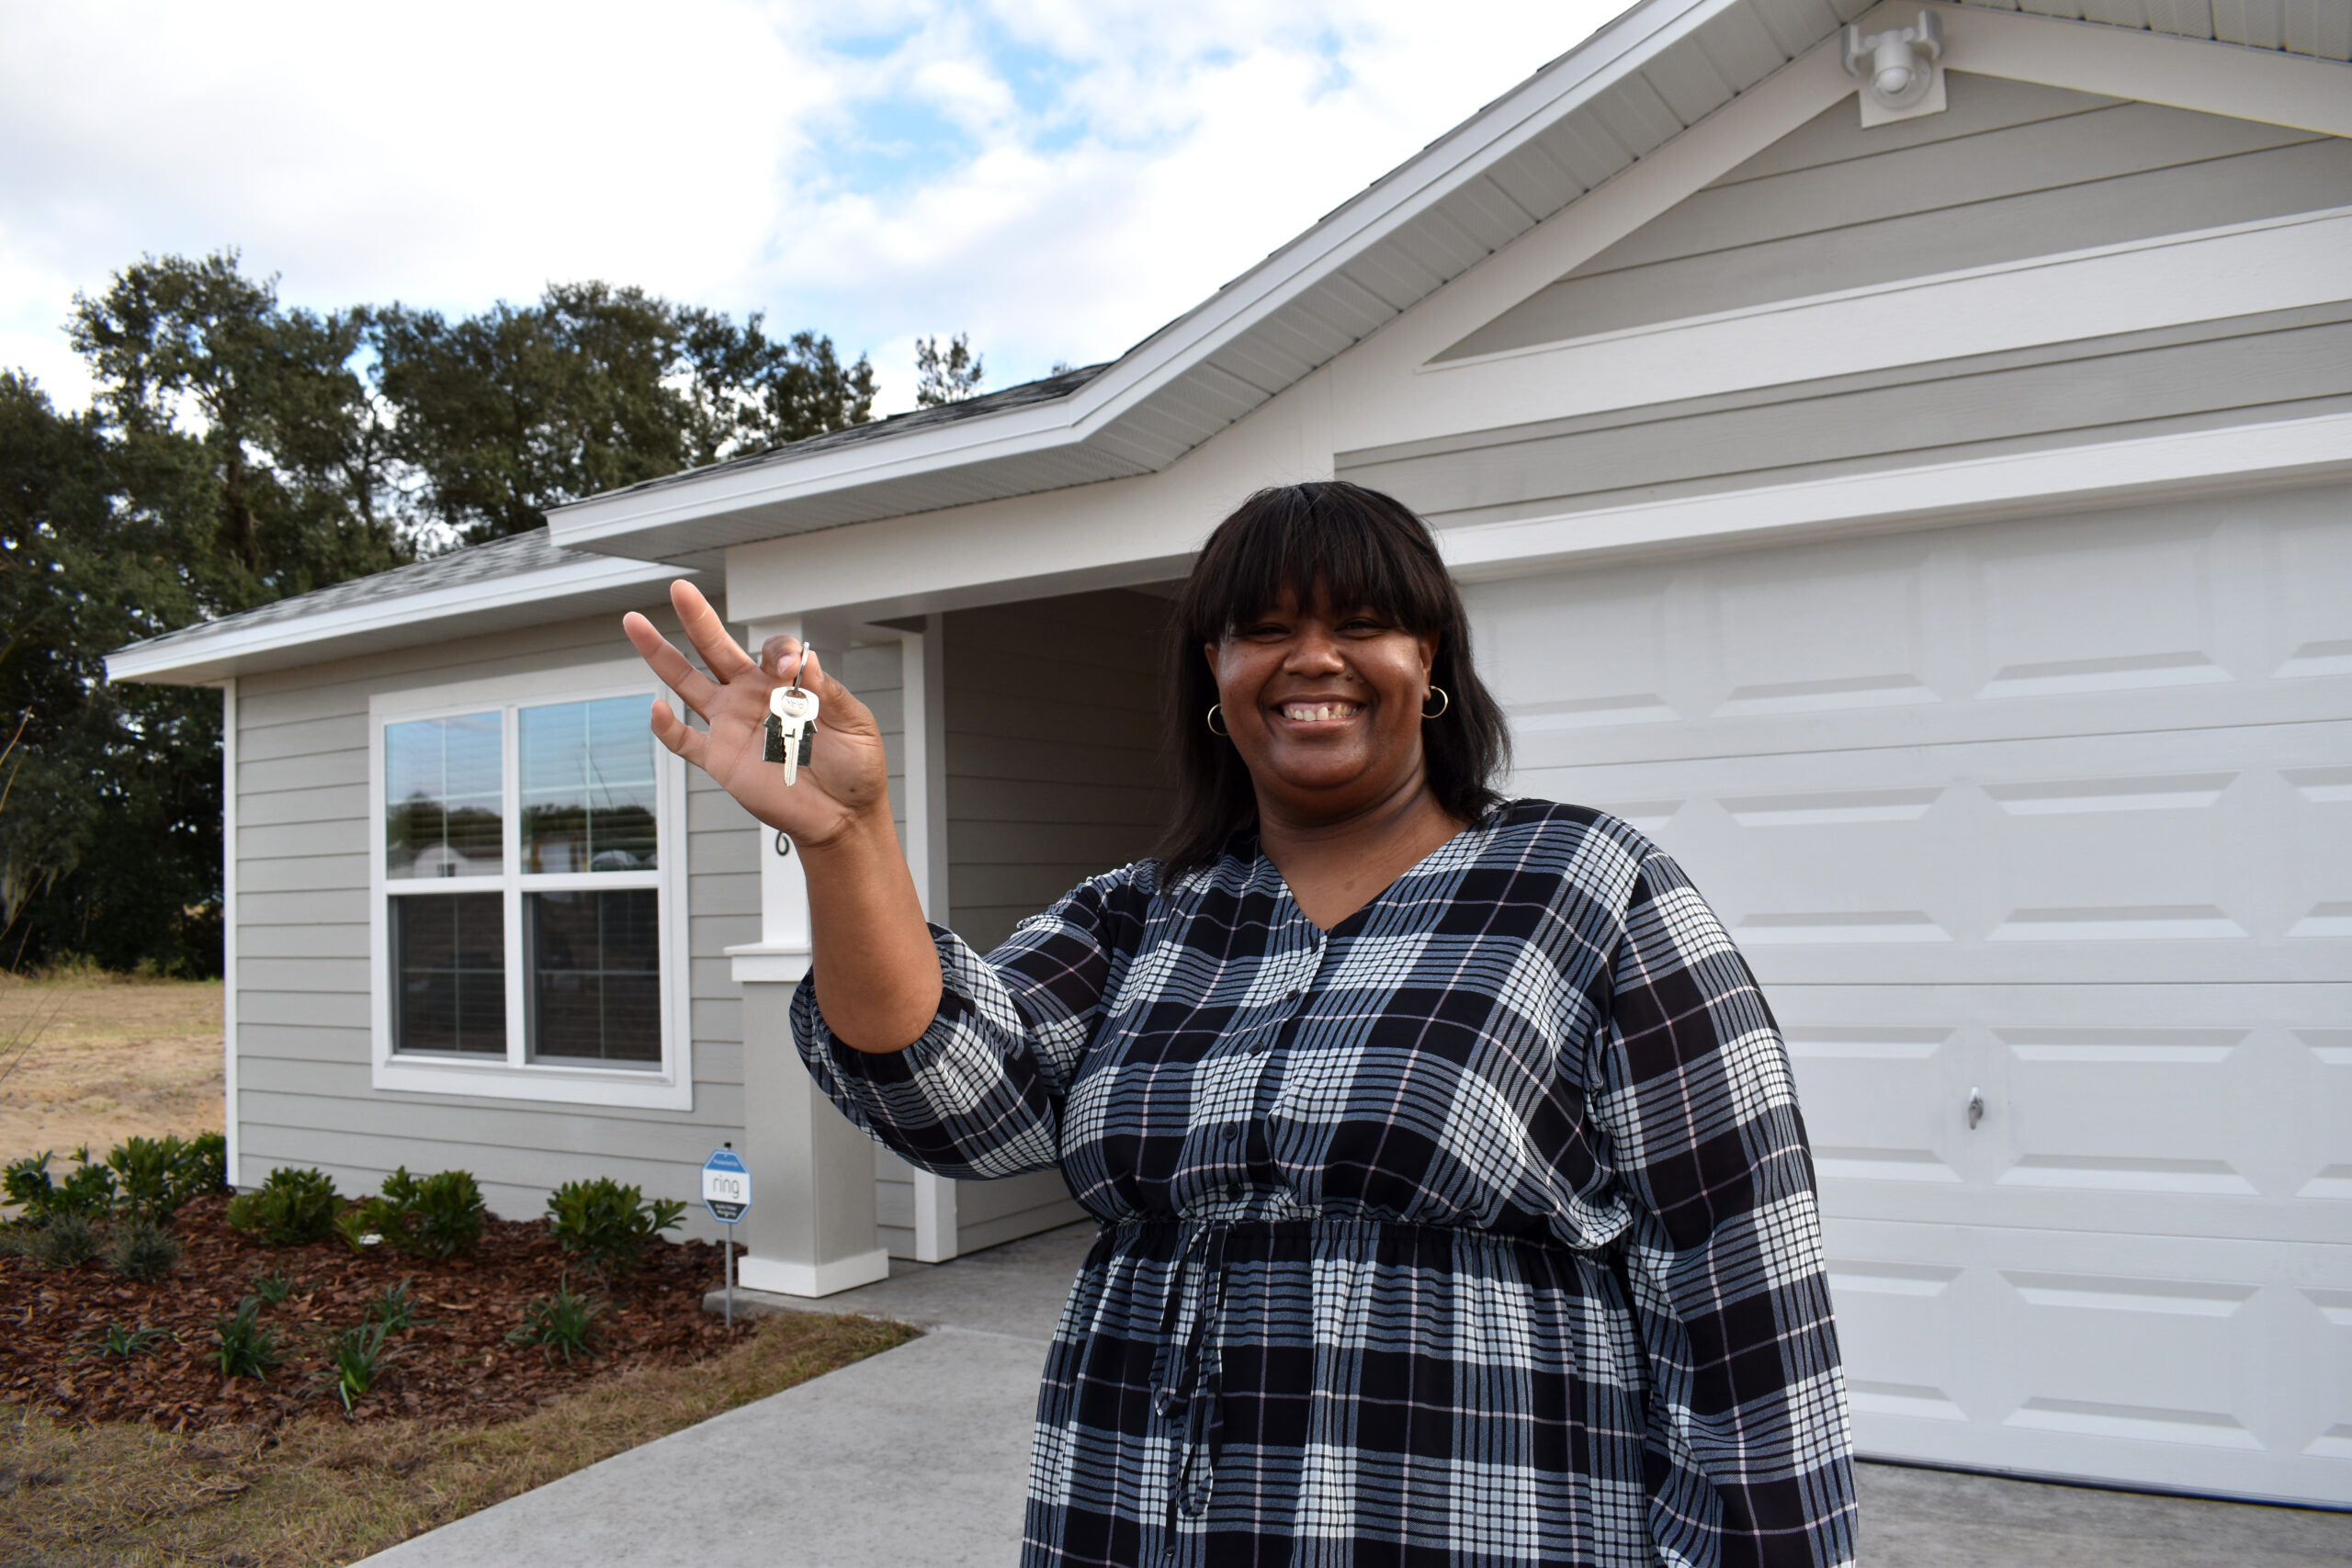 A smiling woman holds up her keys in front of her home.